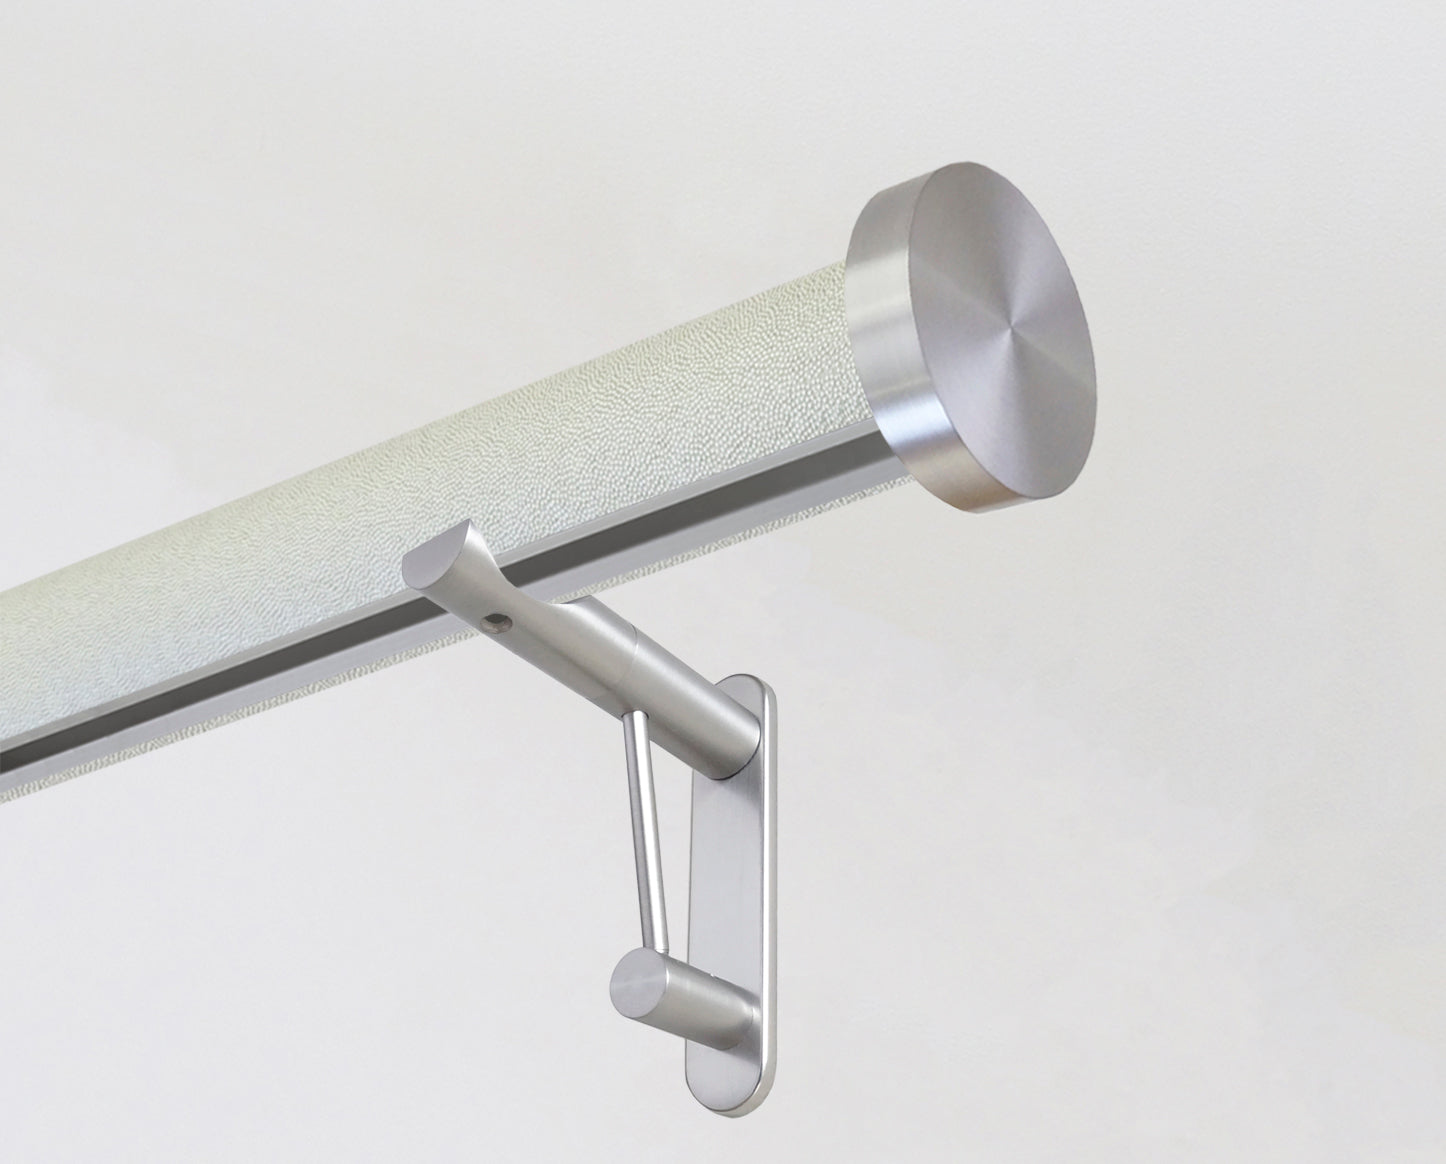 50mm diameter wrapped and tracked white pepper curtain pole with steel mini disc finials